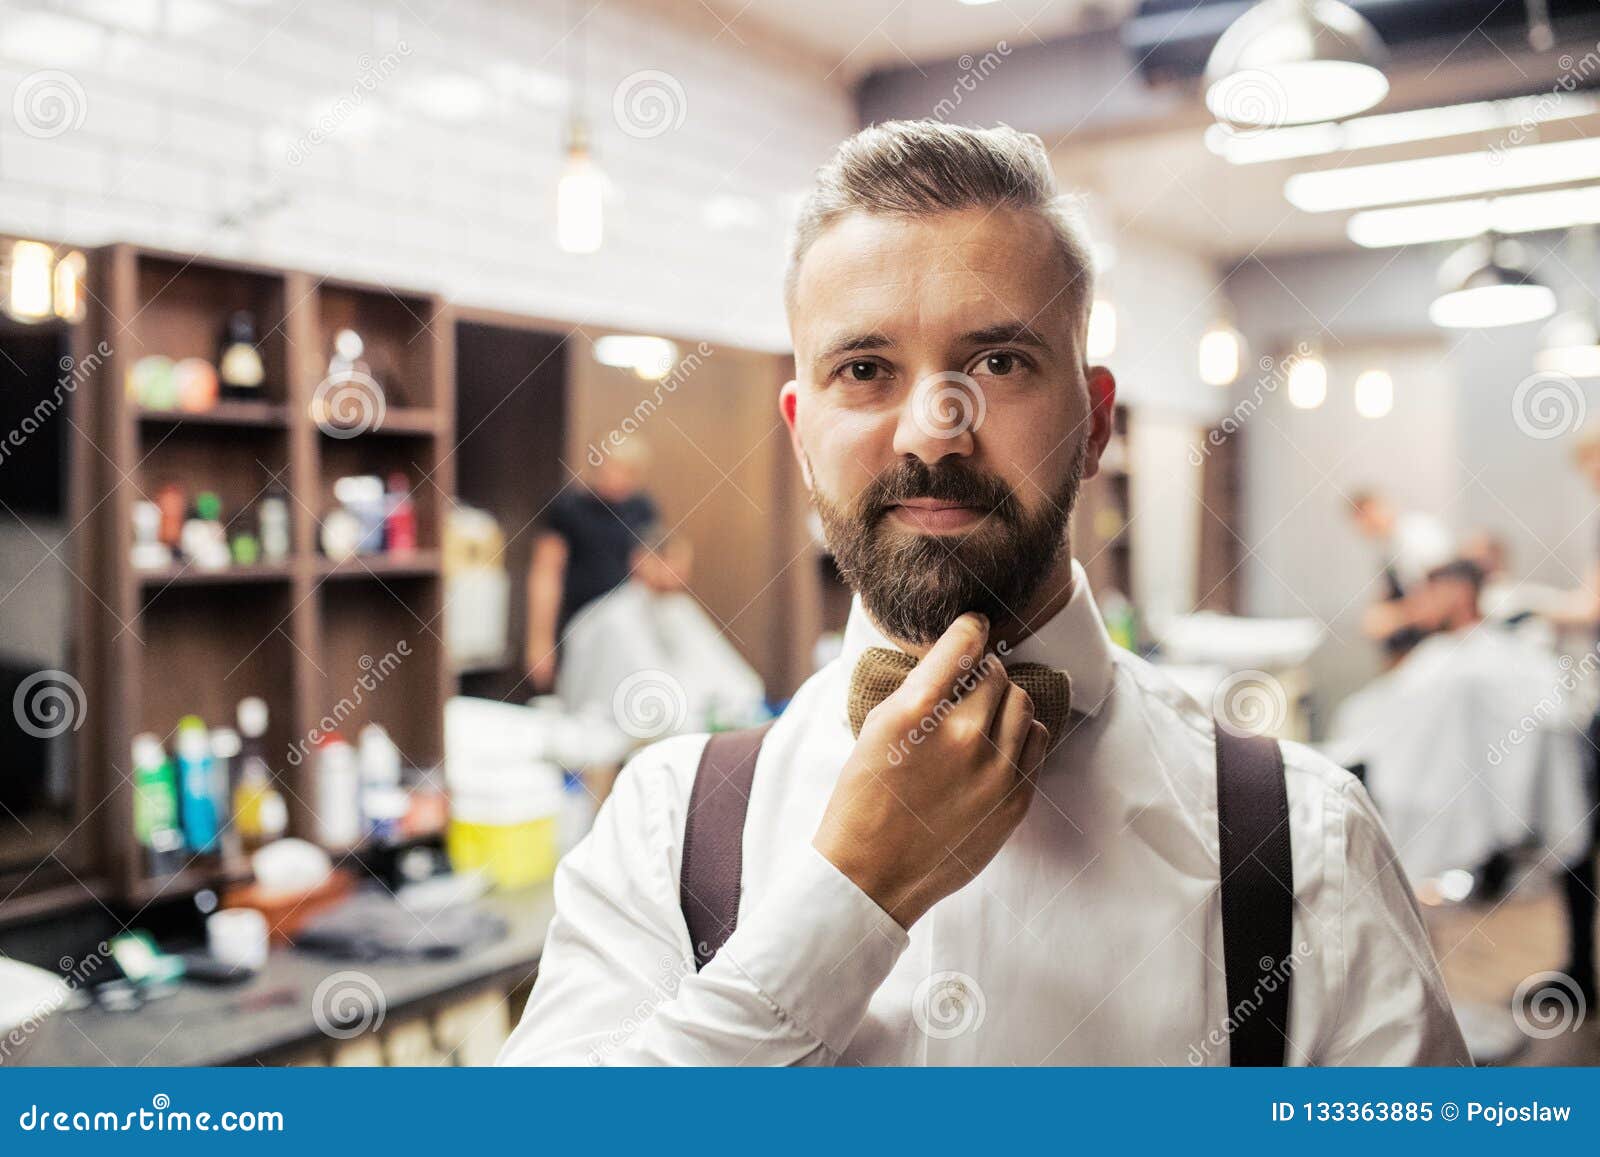 A Portrait of Handsome Hipster Man Client Standing in Barber Shop ...